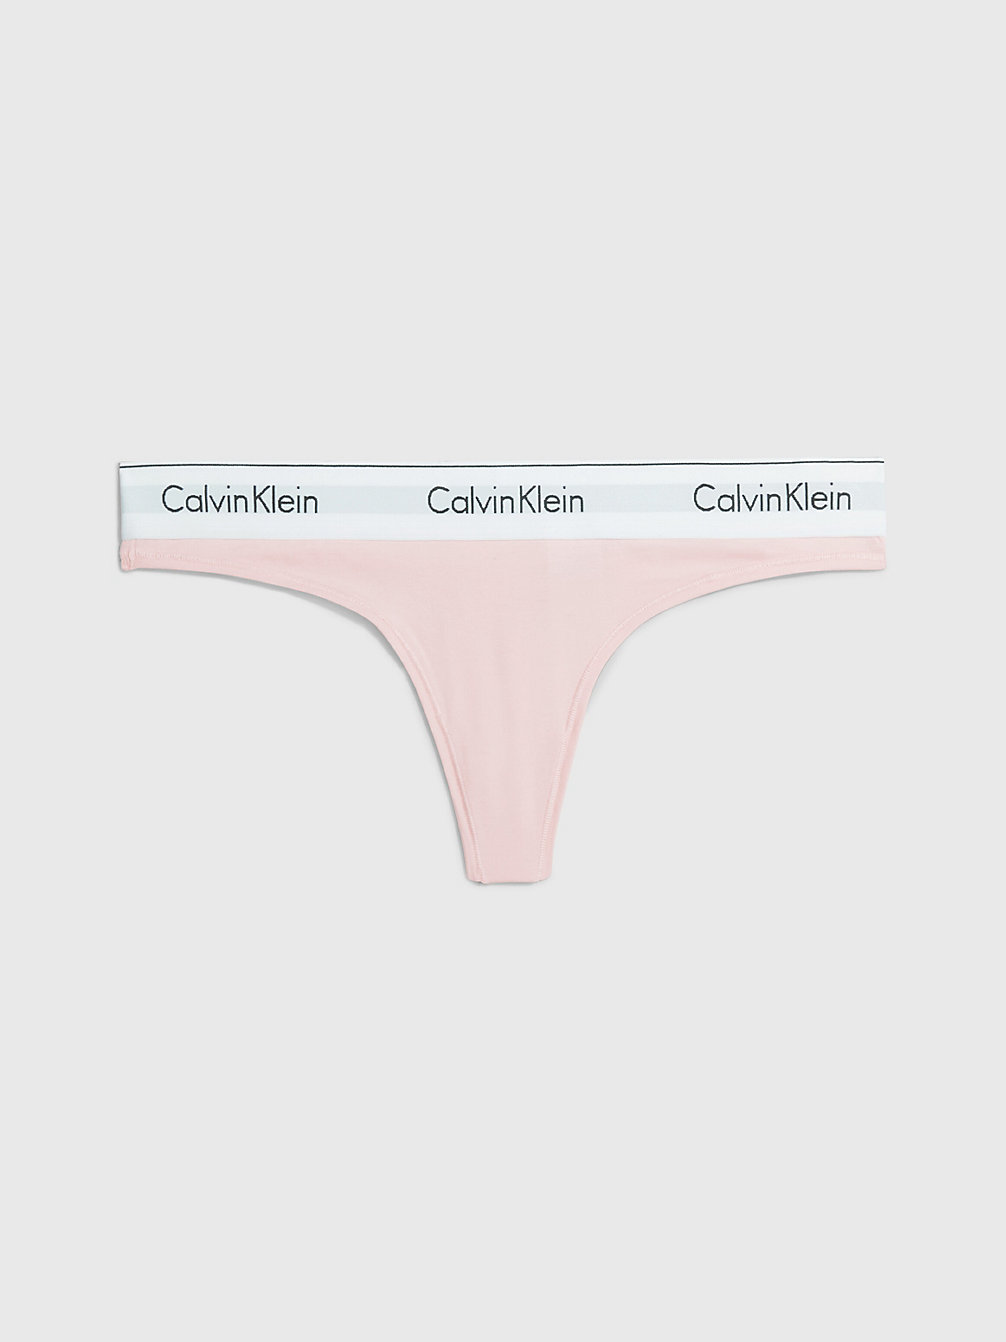 Tanga - Modern Cotton > NYMPHS THIGH > undefined mujer > Calvin Klein